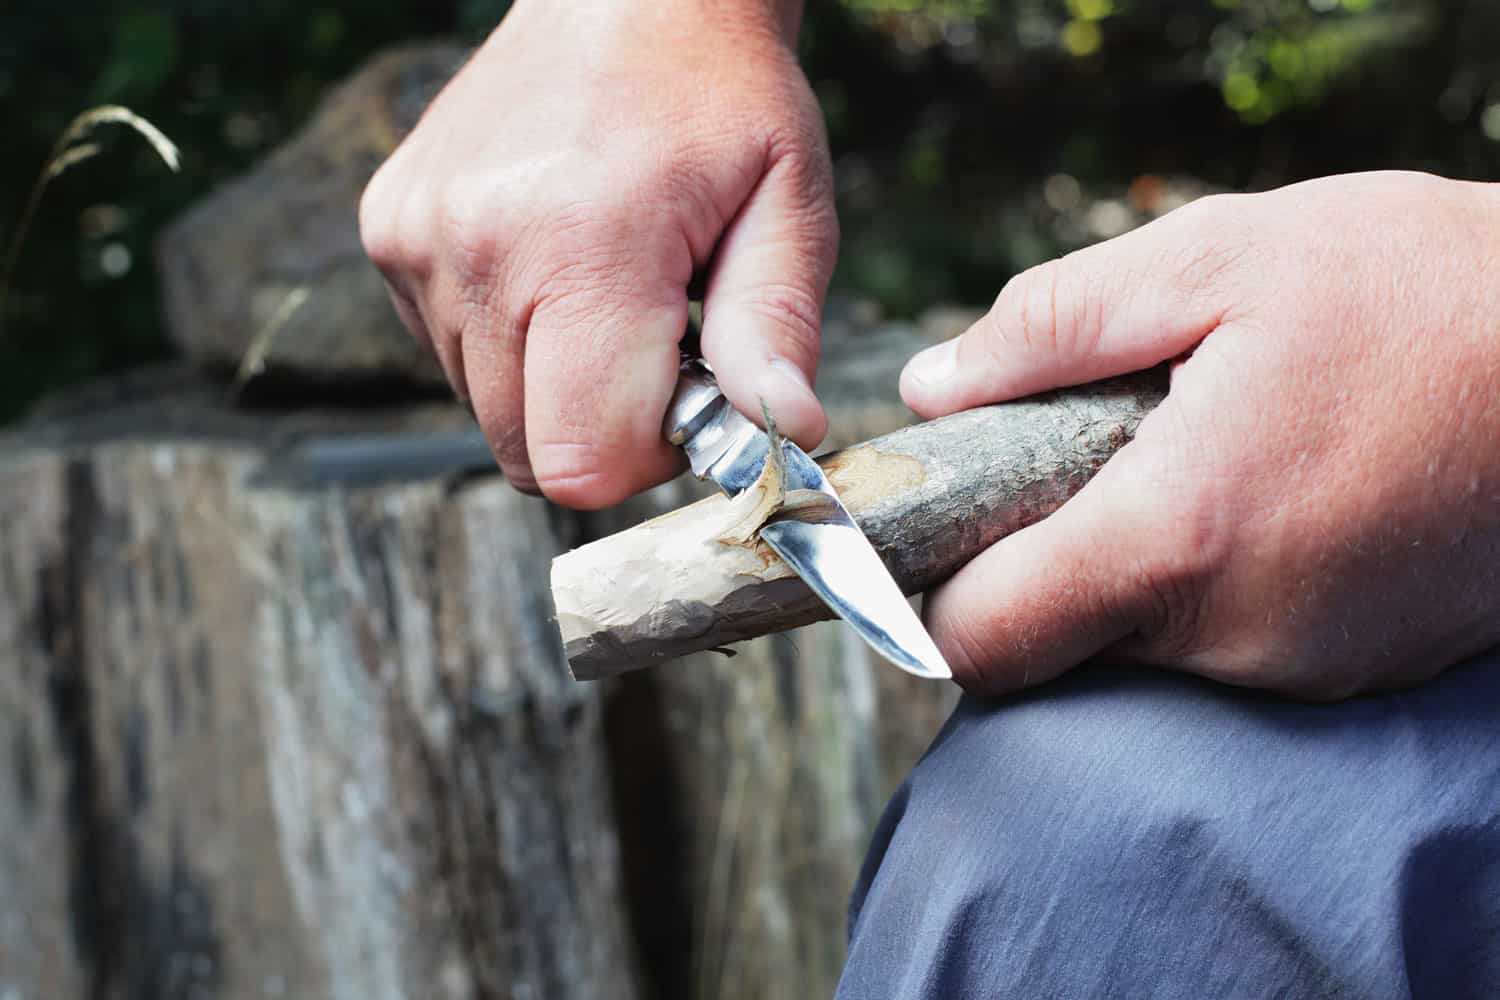 A man sharpening a stick using his knife